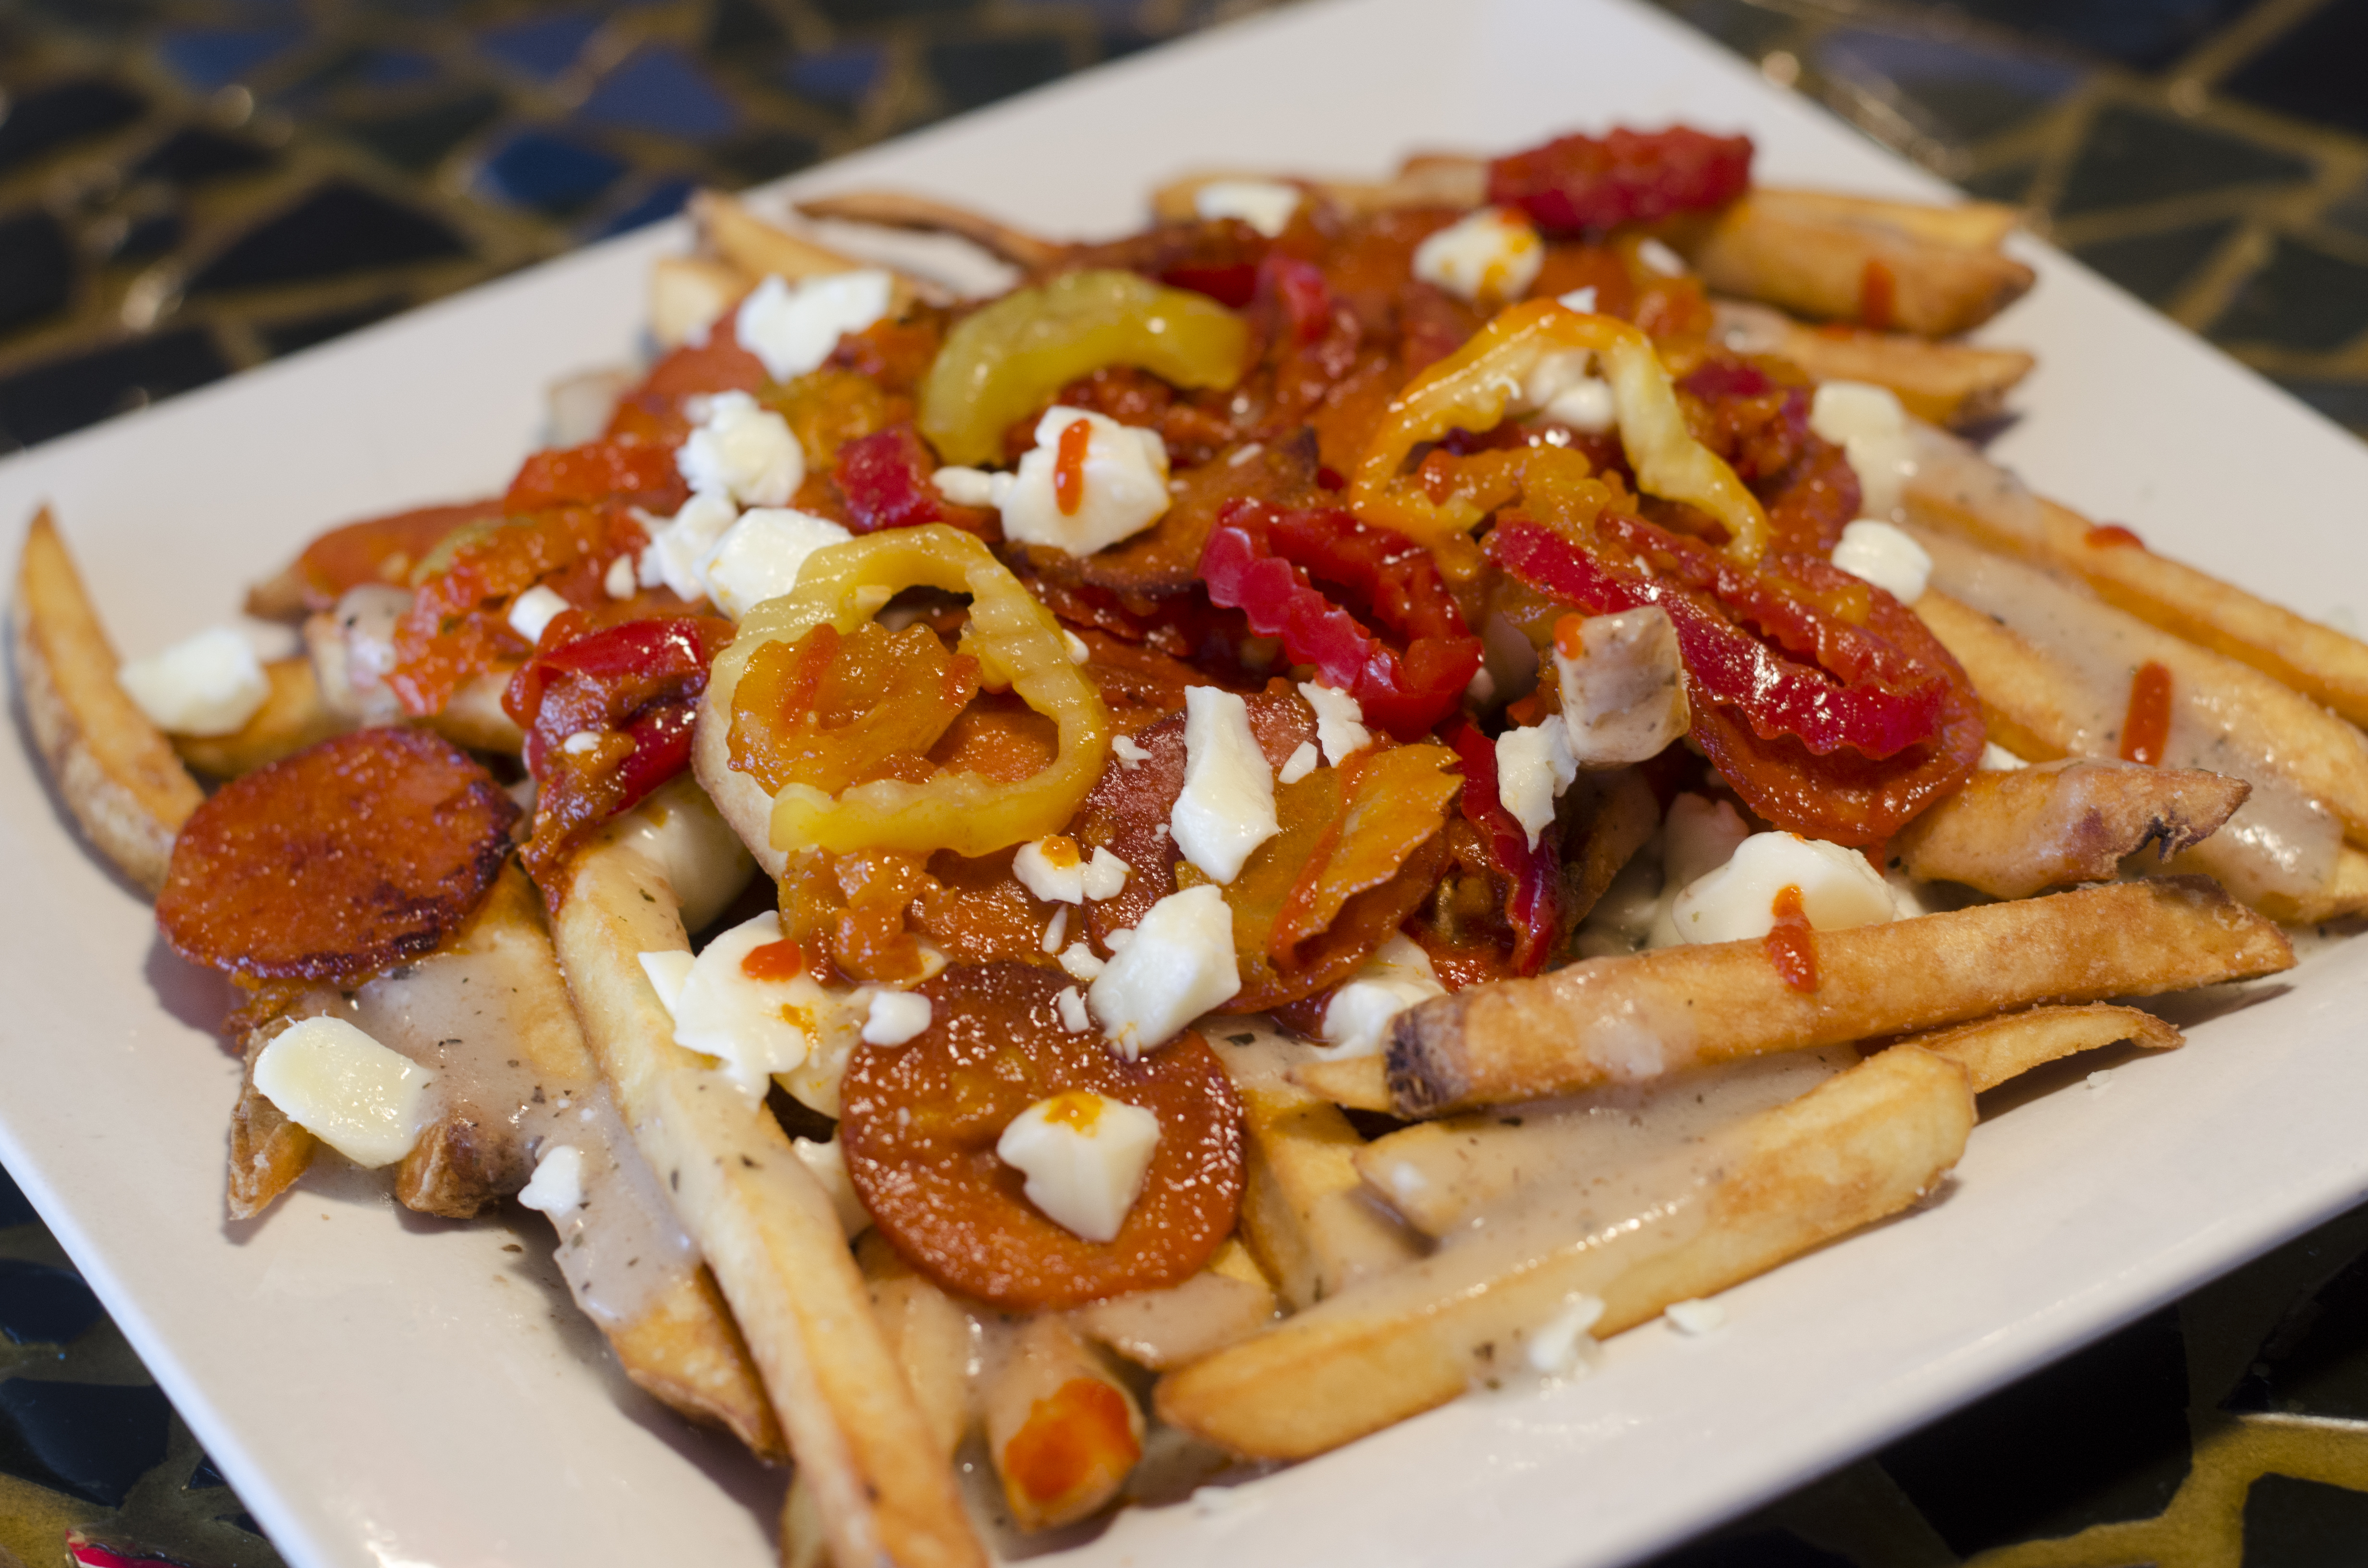 Hot Lips poutine from Phog Lounge in downtown Windsor, Ontario.